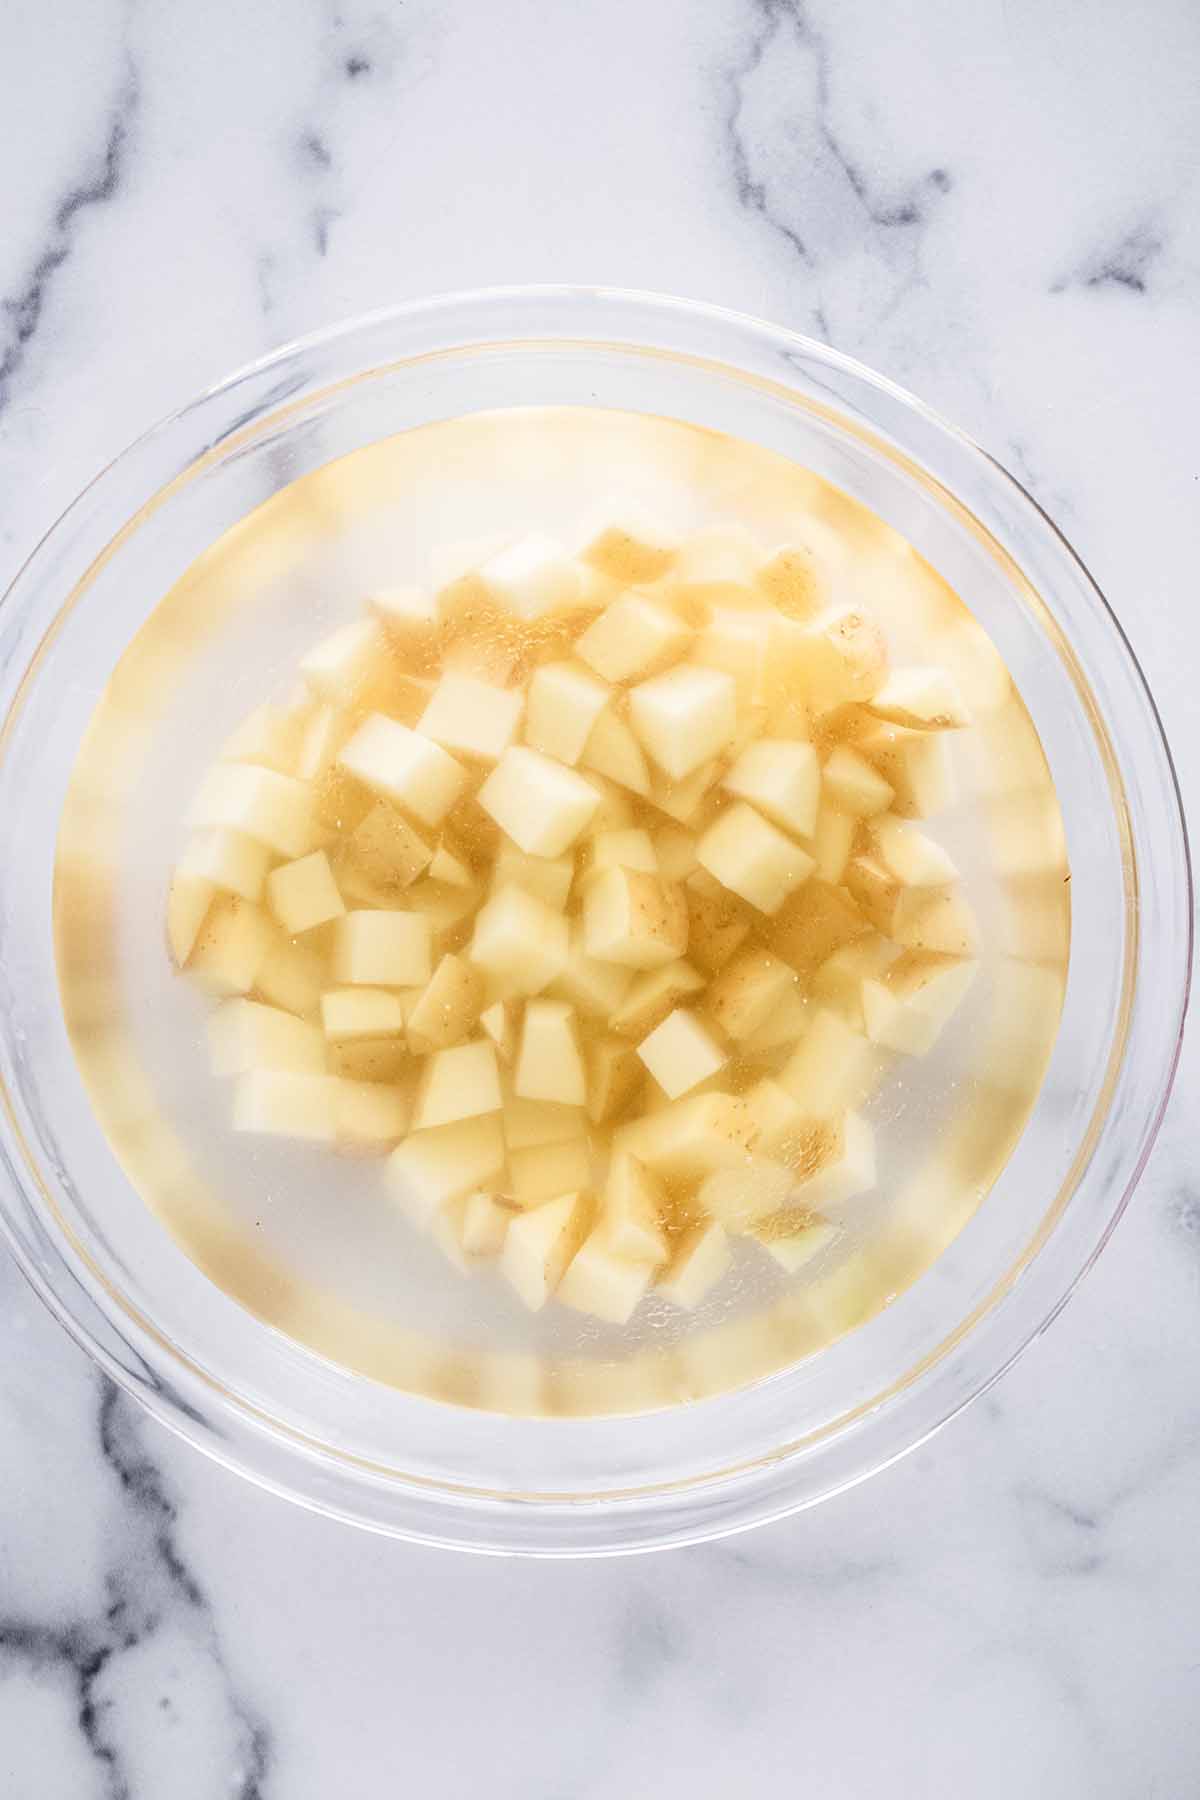 Overhead view of cubed potatoes soaking in water in a glass bowl.